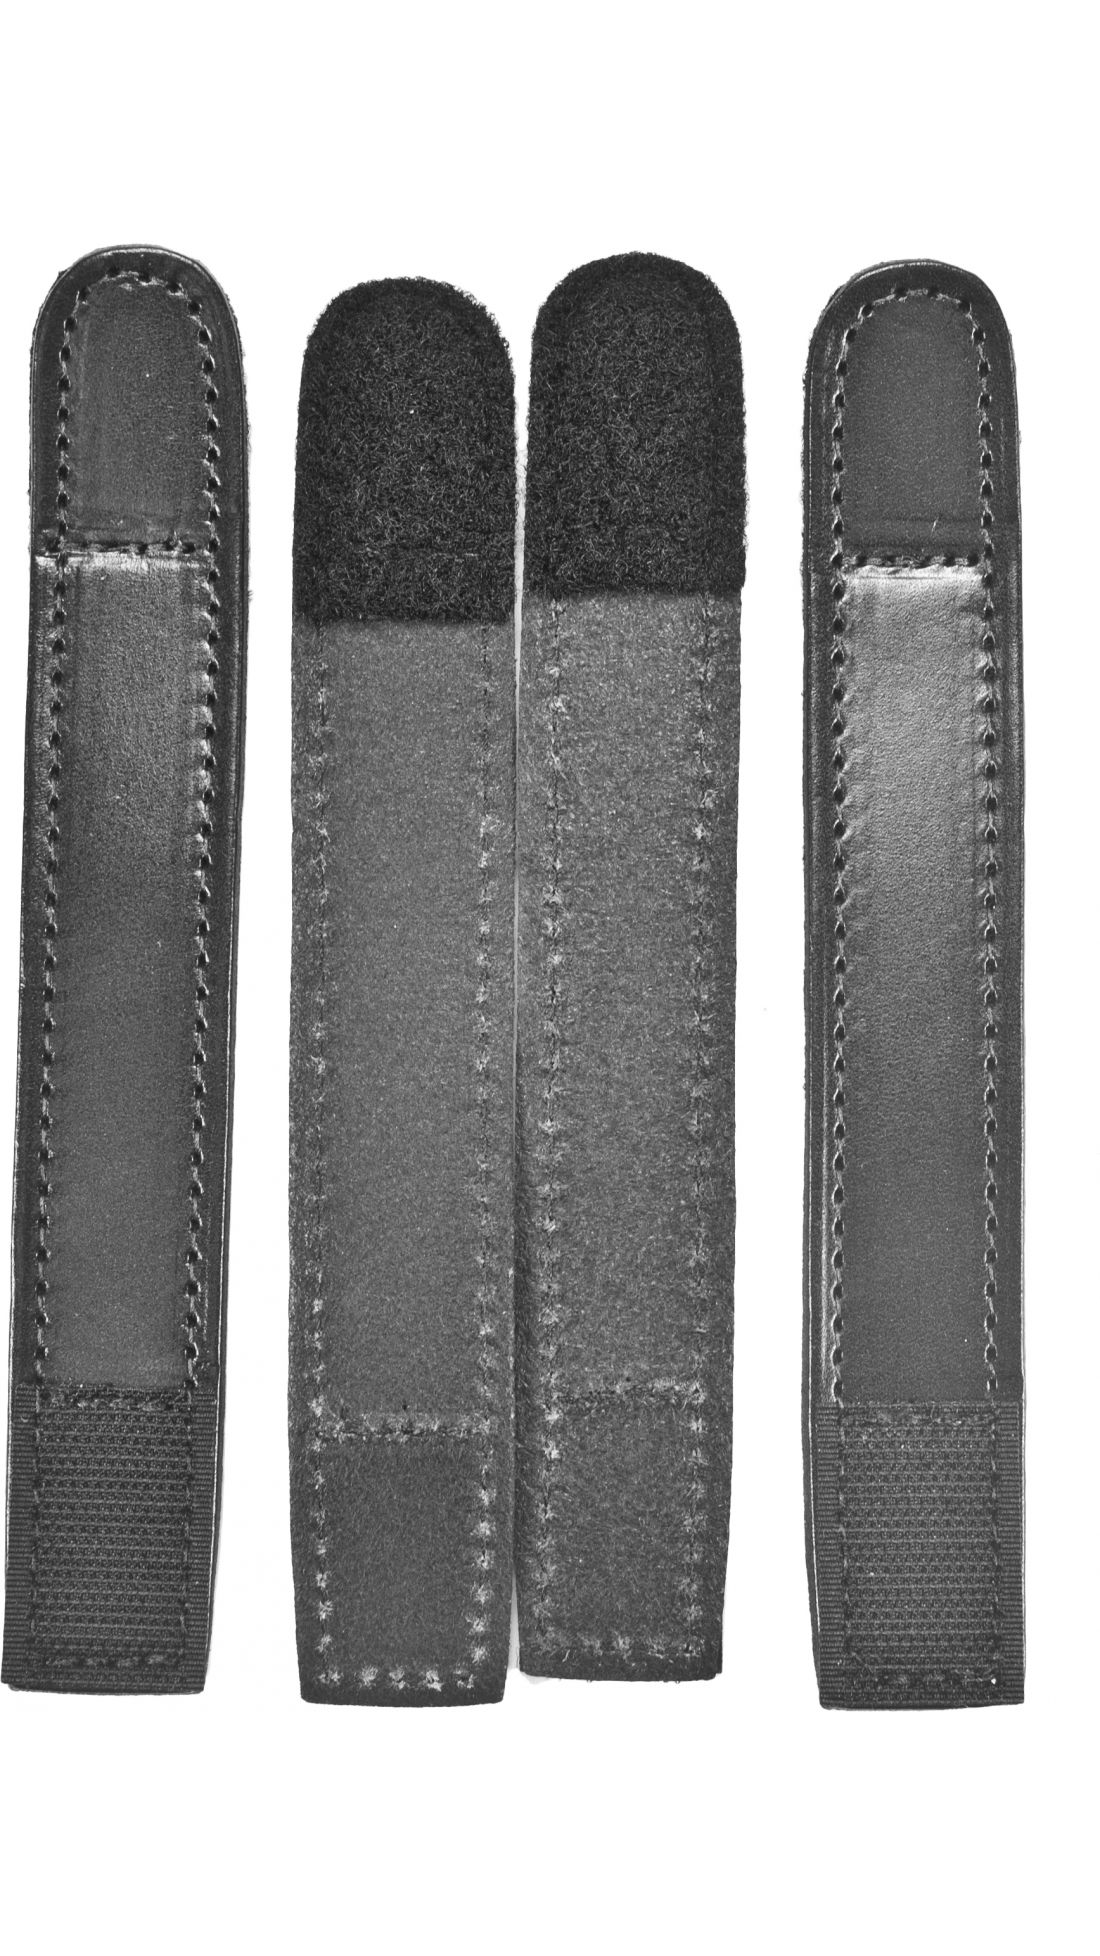 Gould & Goodrich Leather Belt Keeper | Up to 20% Off Free Shipping over